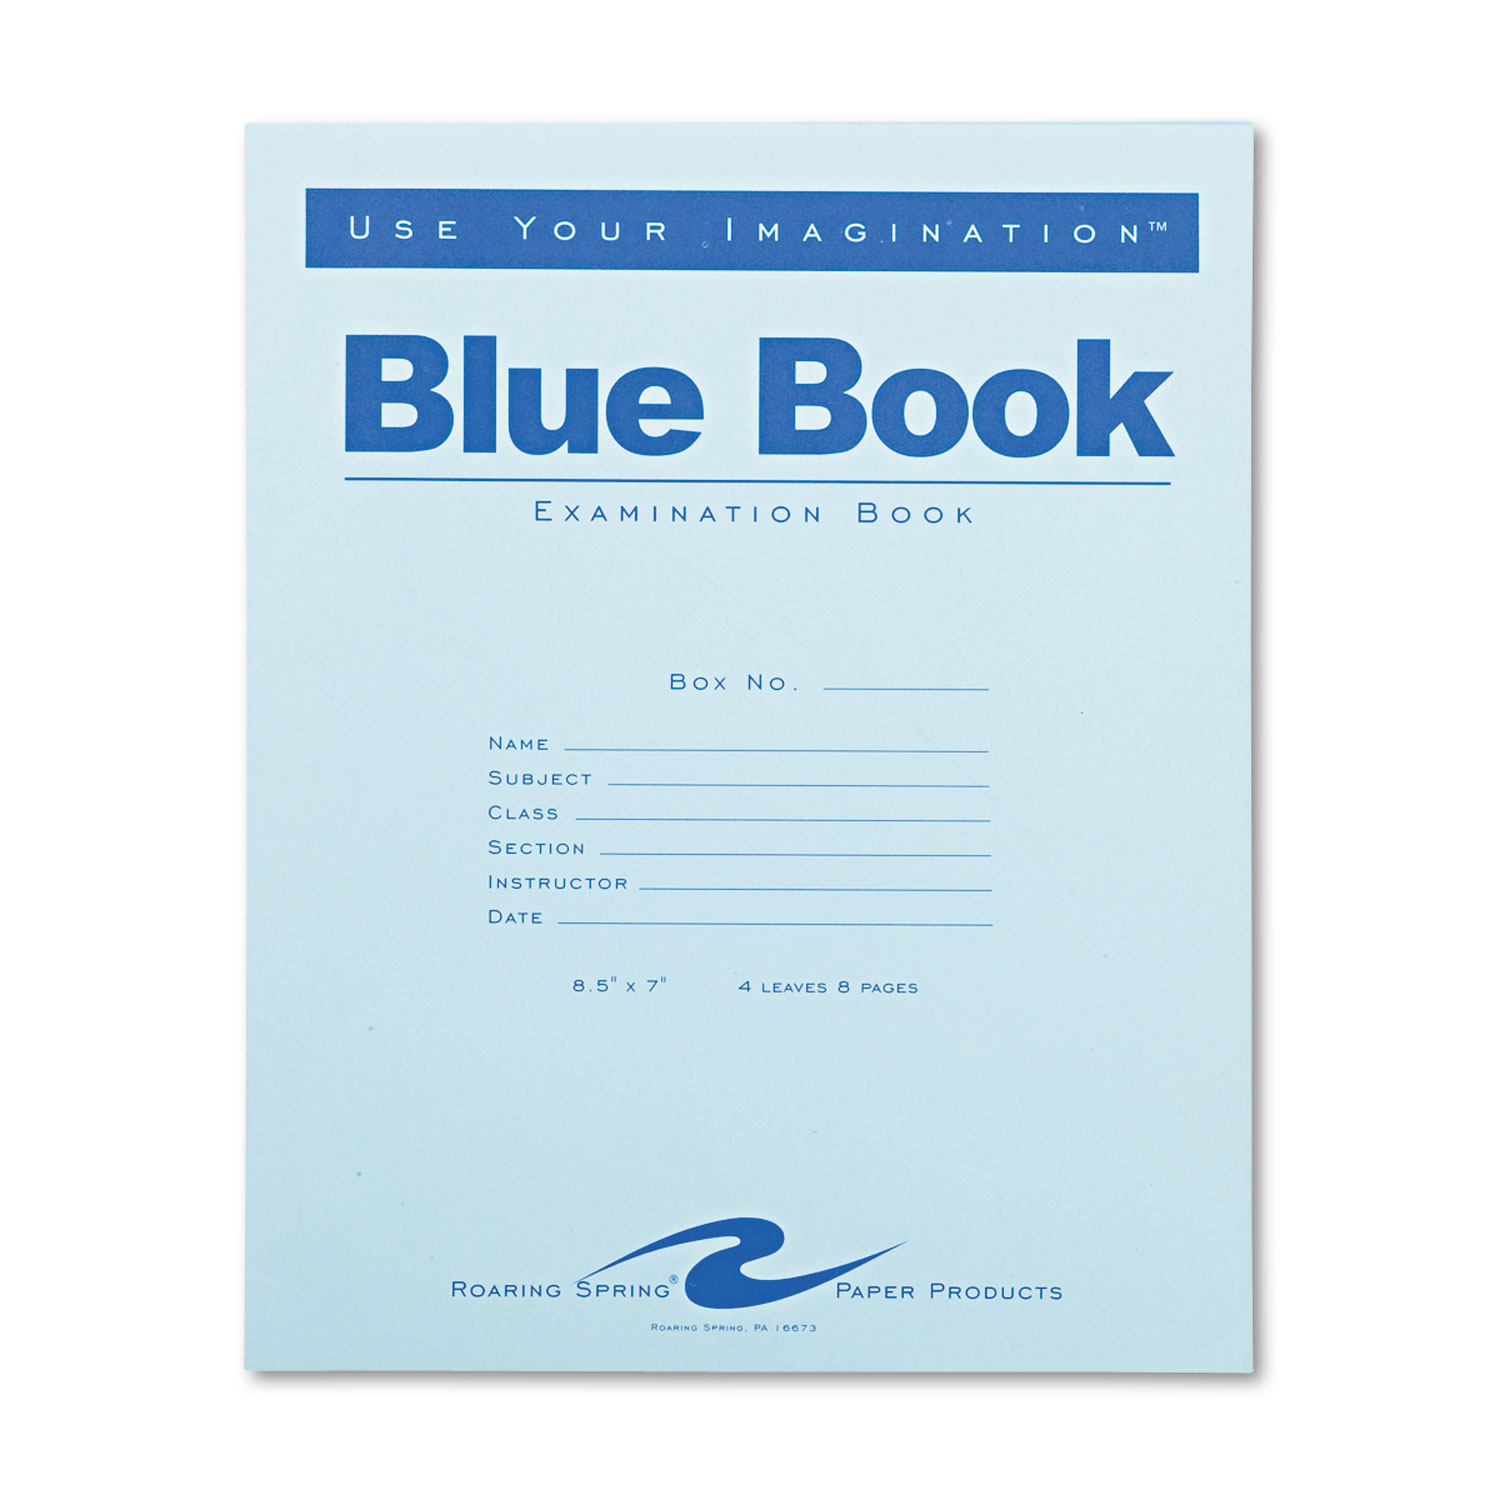 Roaring Spring ROA77510  Exam Blue Book, Legal Rule, 8 1/2 x 7, White, 4 Sheets/8 Pages